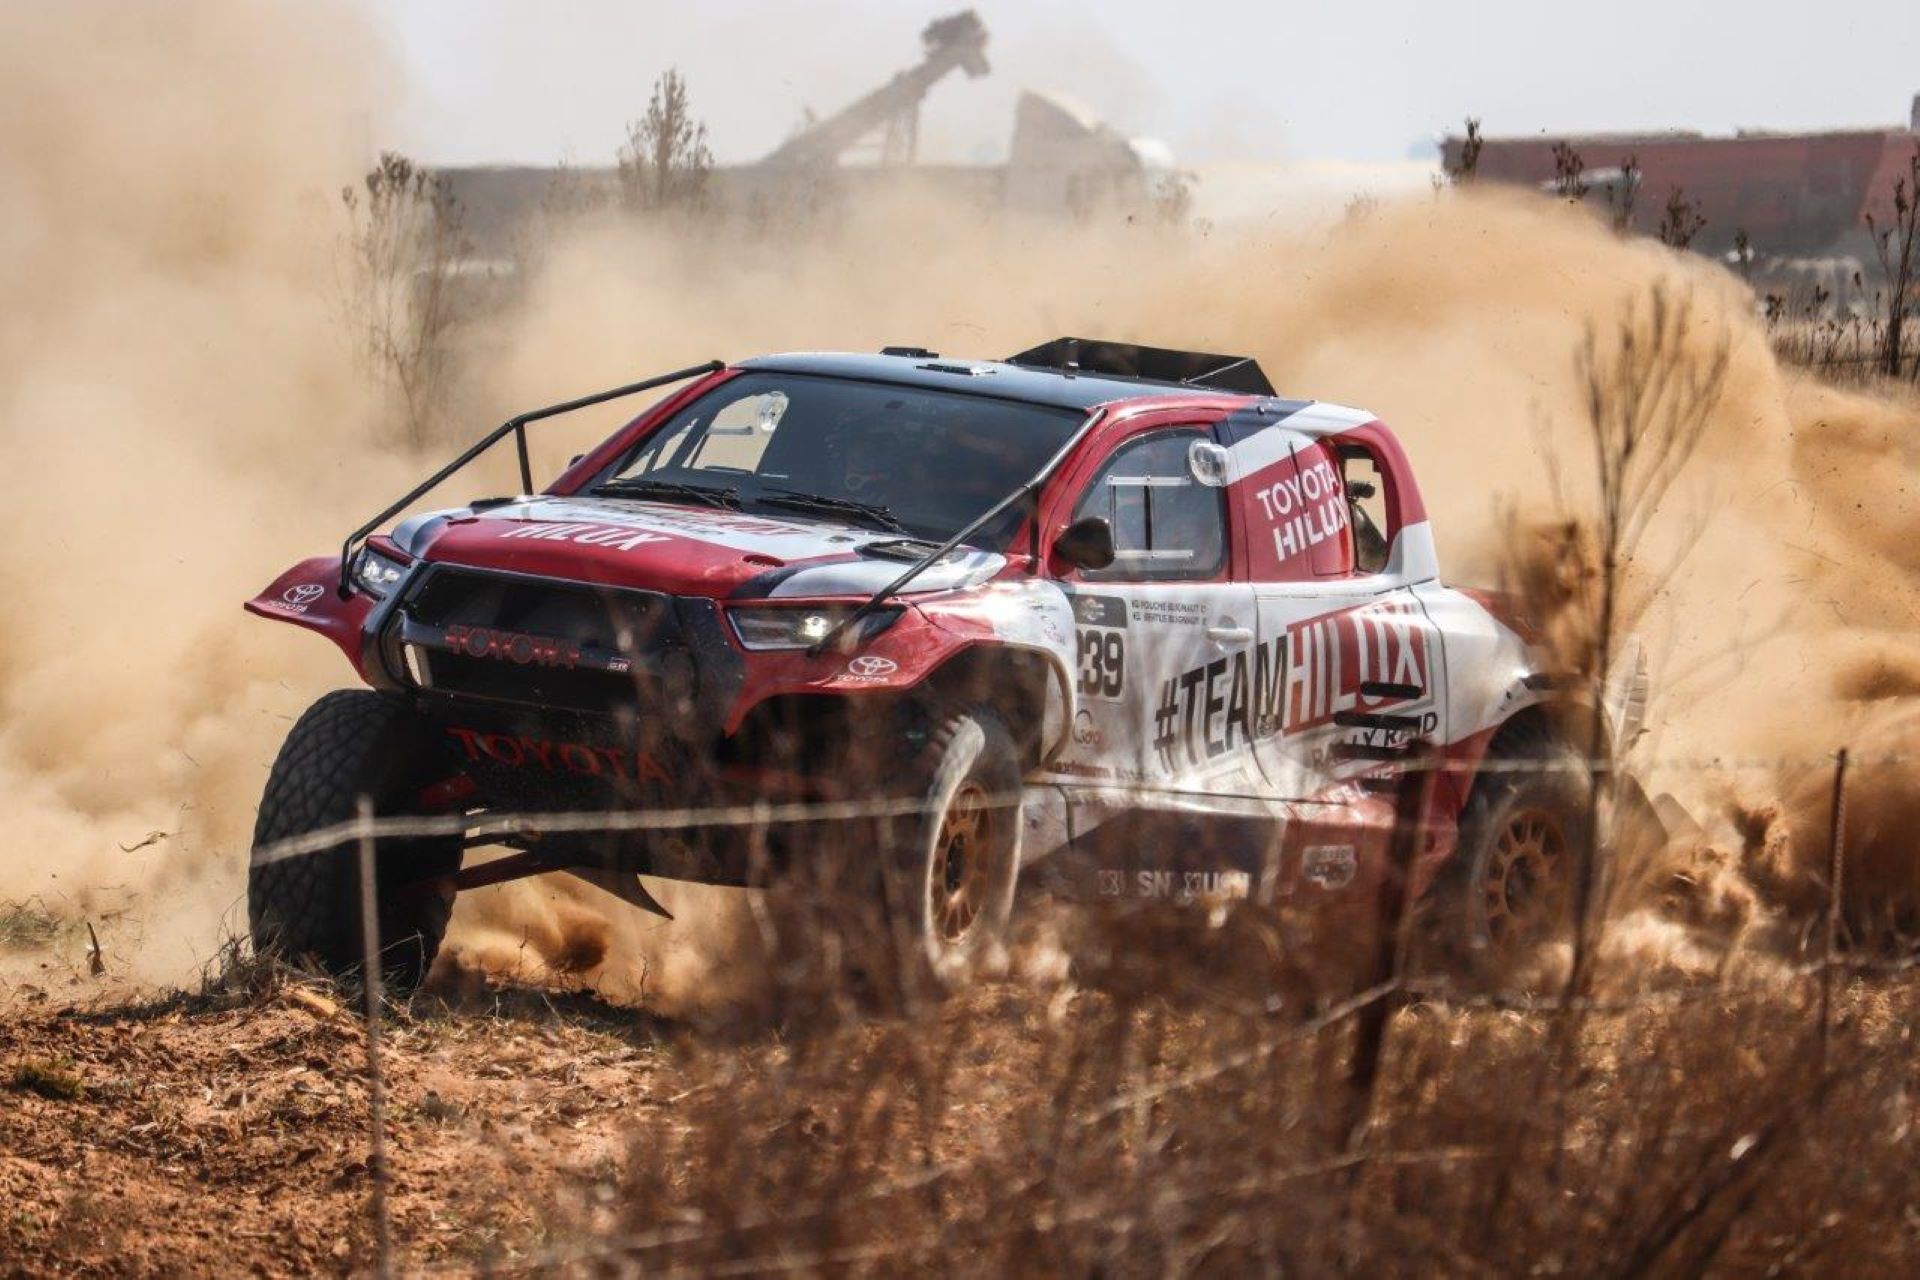 Thrilling Rally Returns to Malelane with Star-Studded Lineup